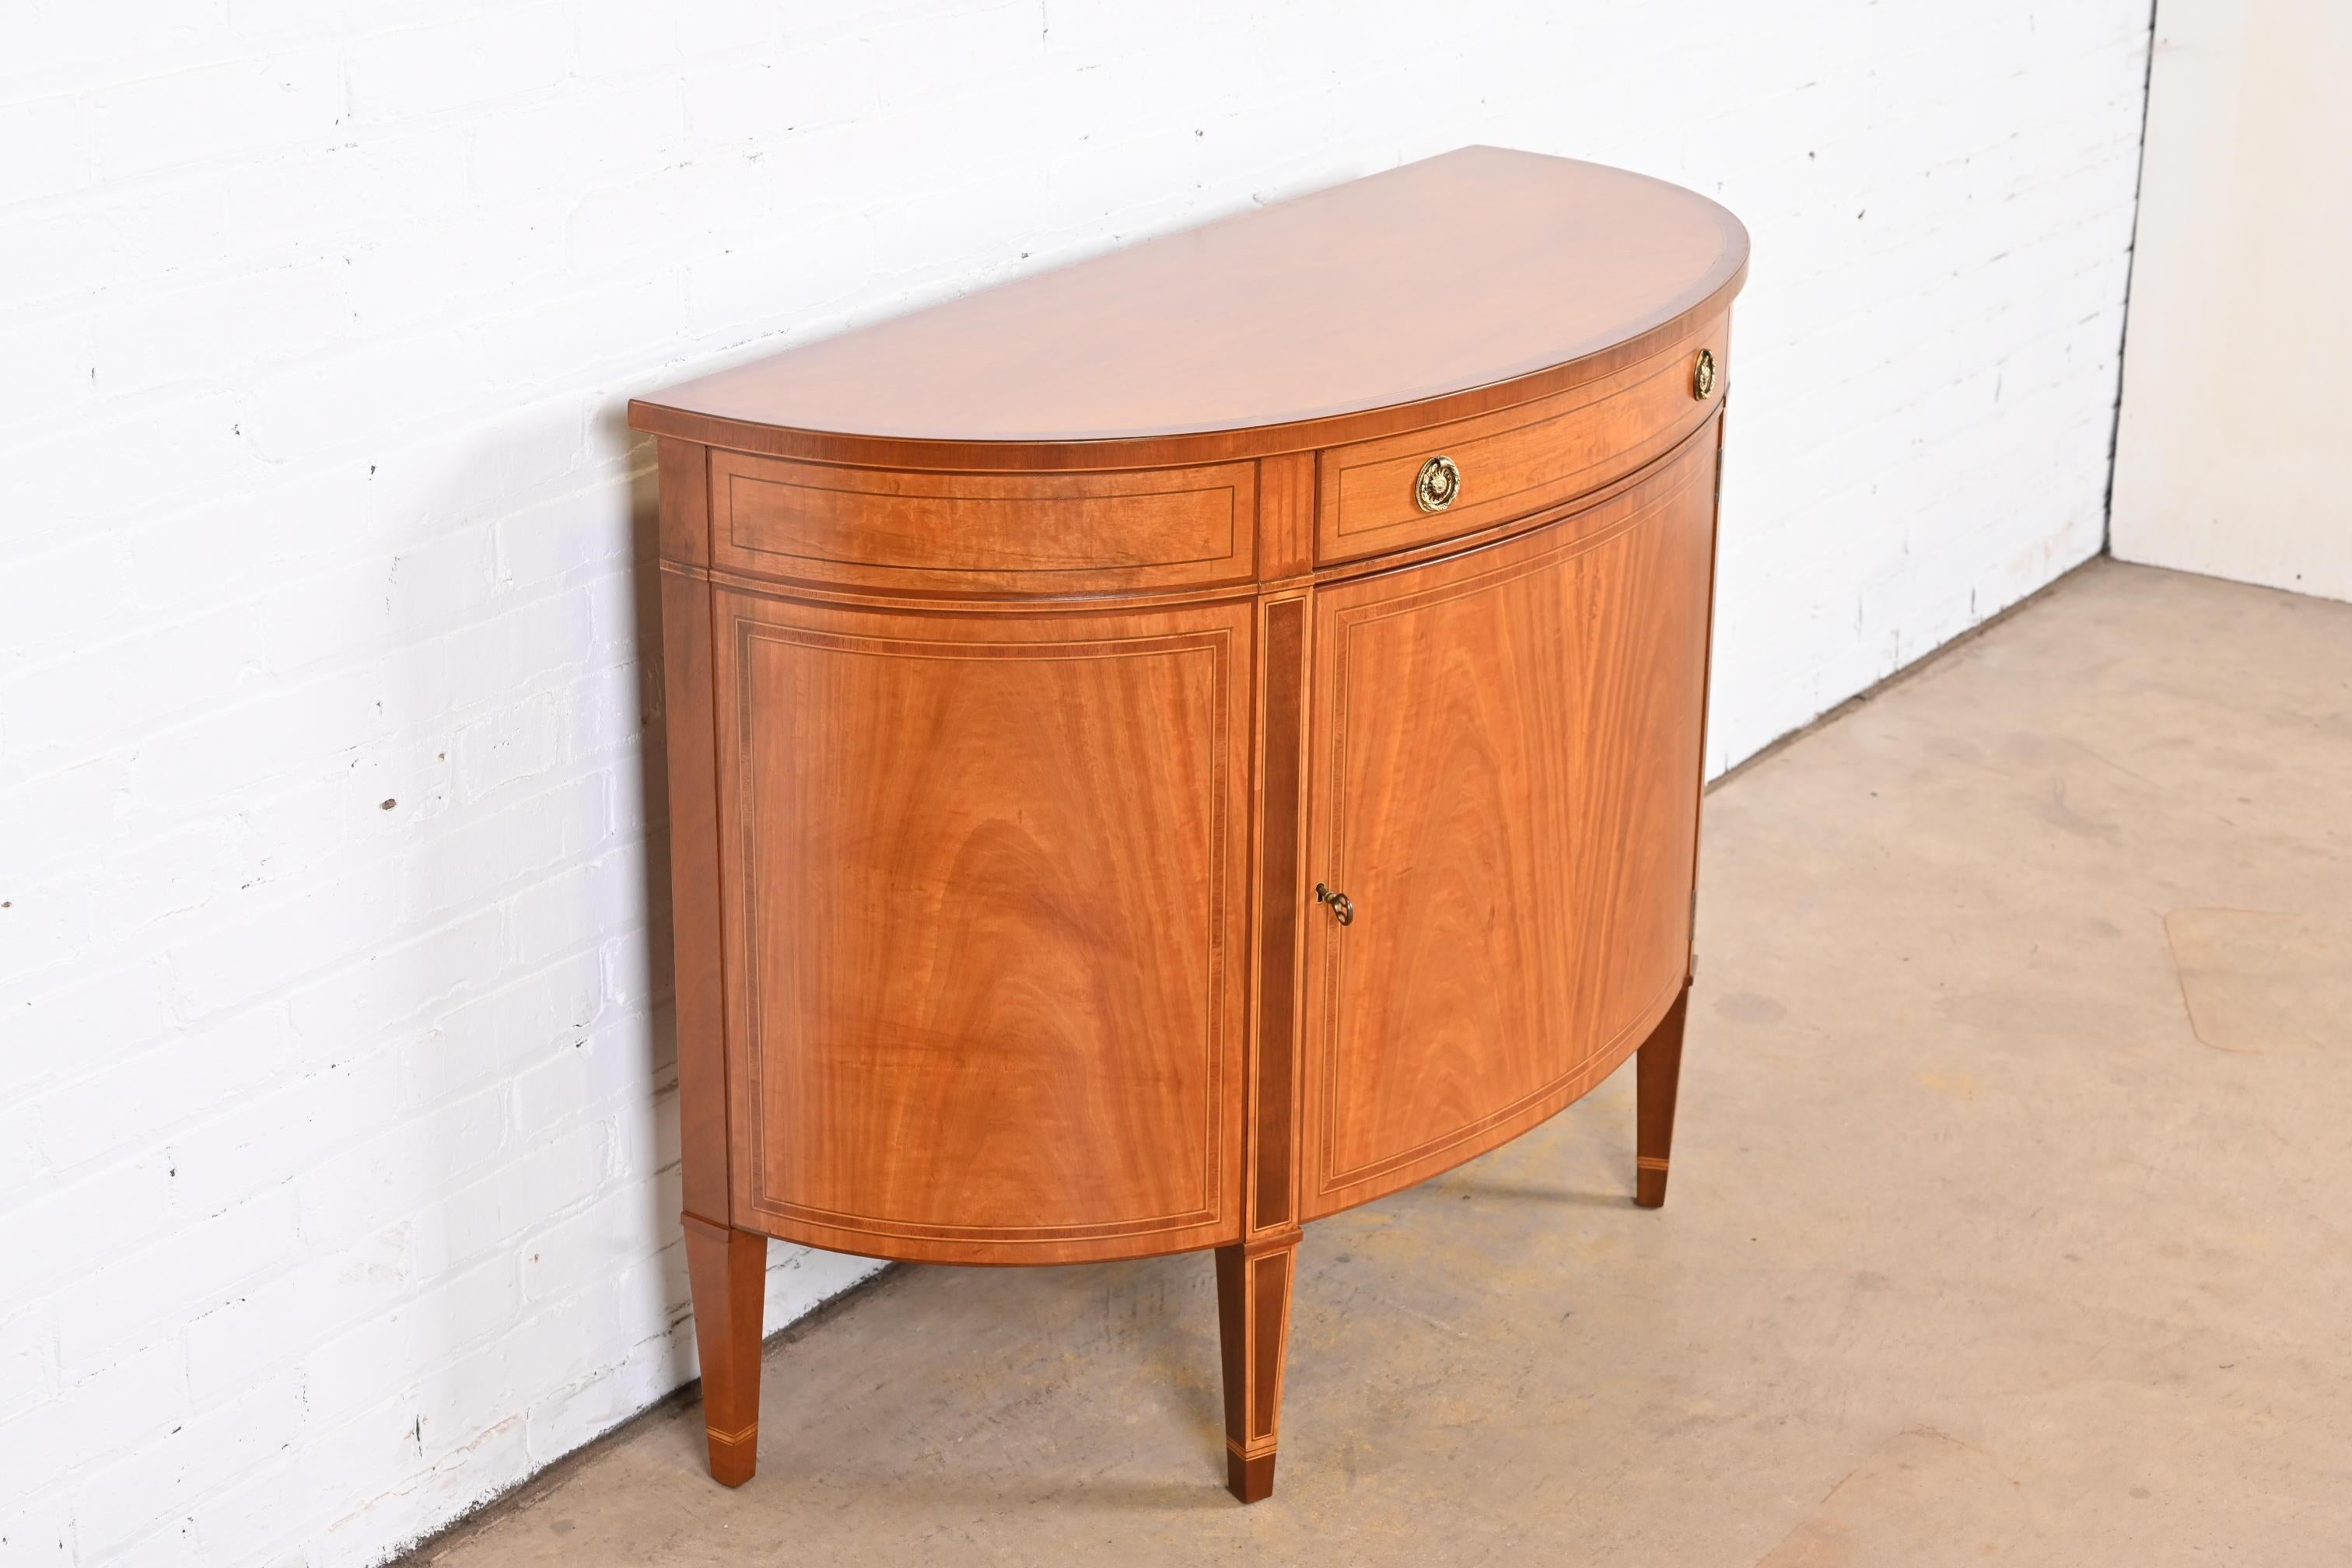 20th Century Baker Furniture Federal Mahogany and Satinwood Demilune Cabinet, Refinished